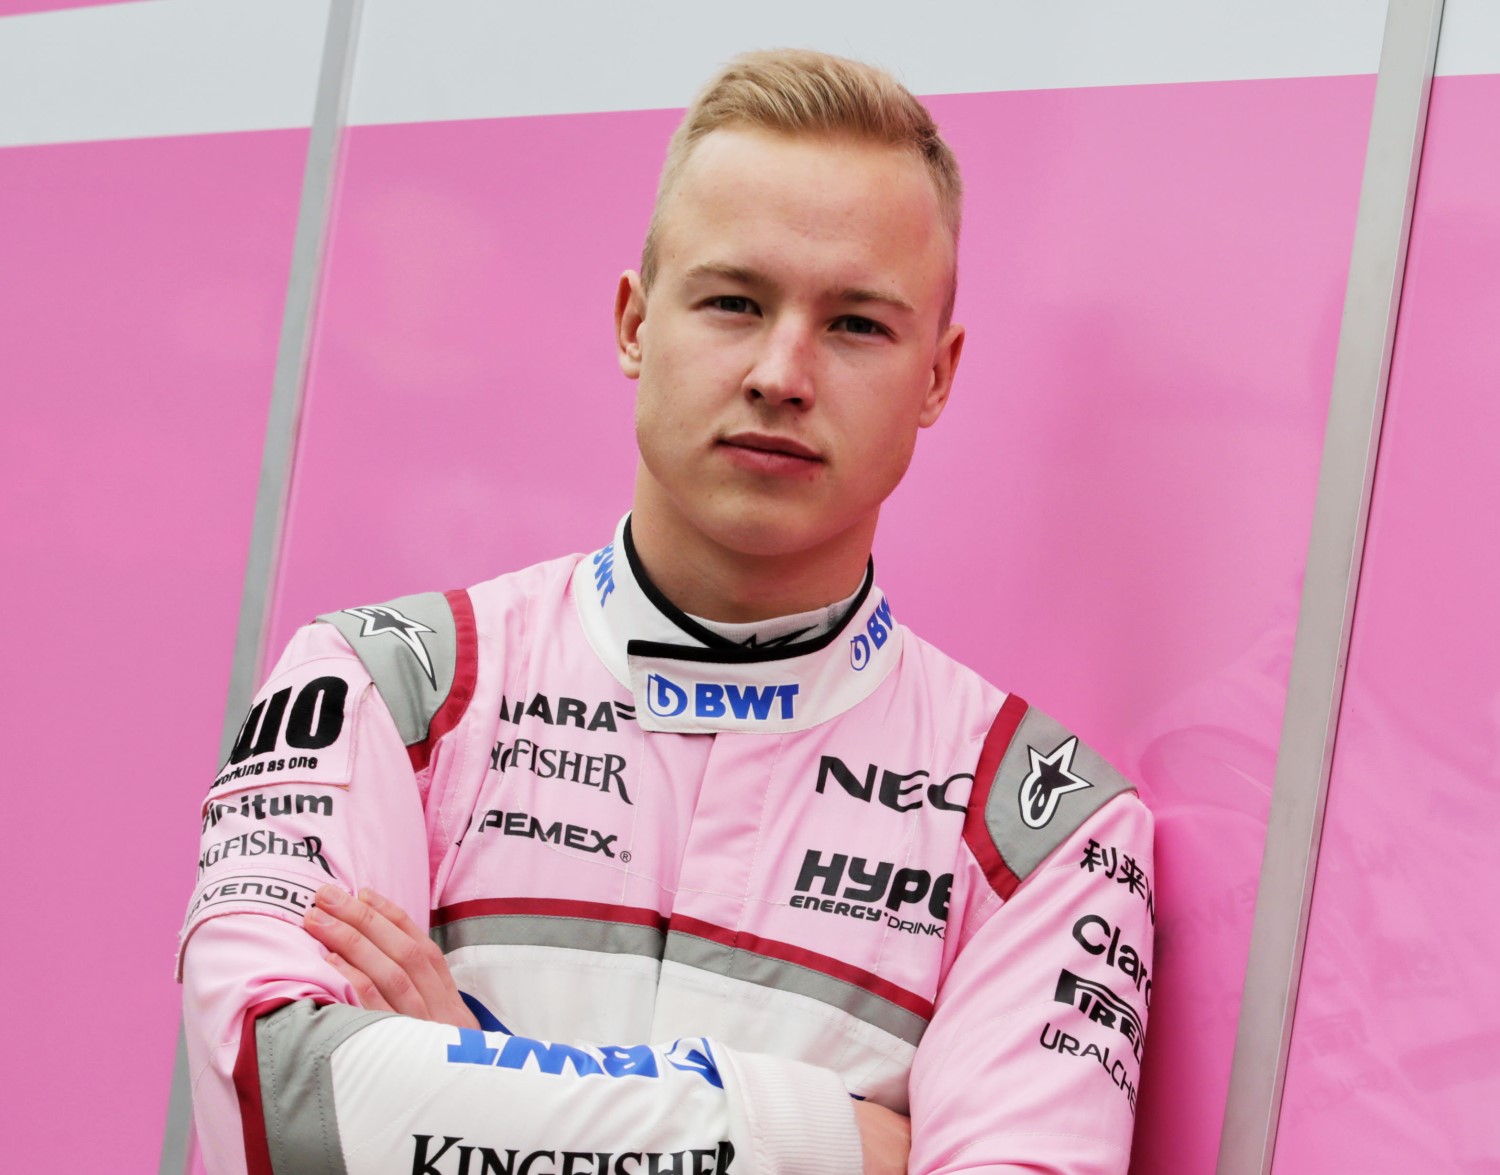 Nikita Mazepin's daddy wants to buy him an F1 team